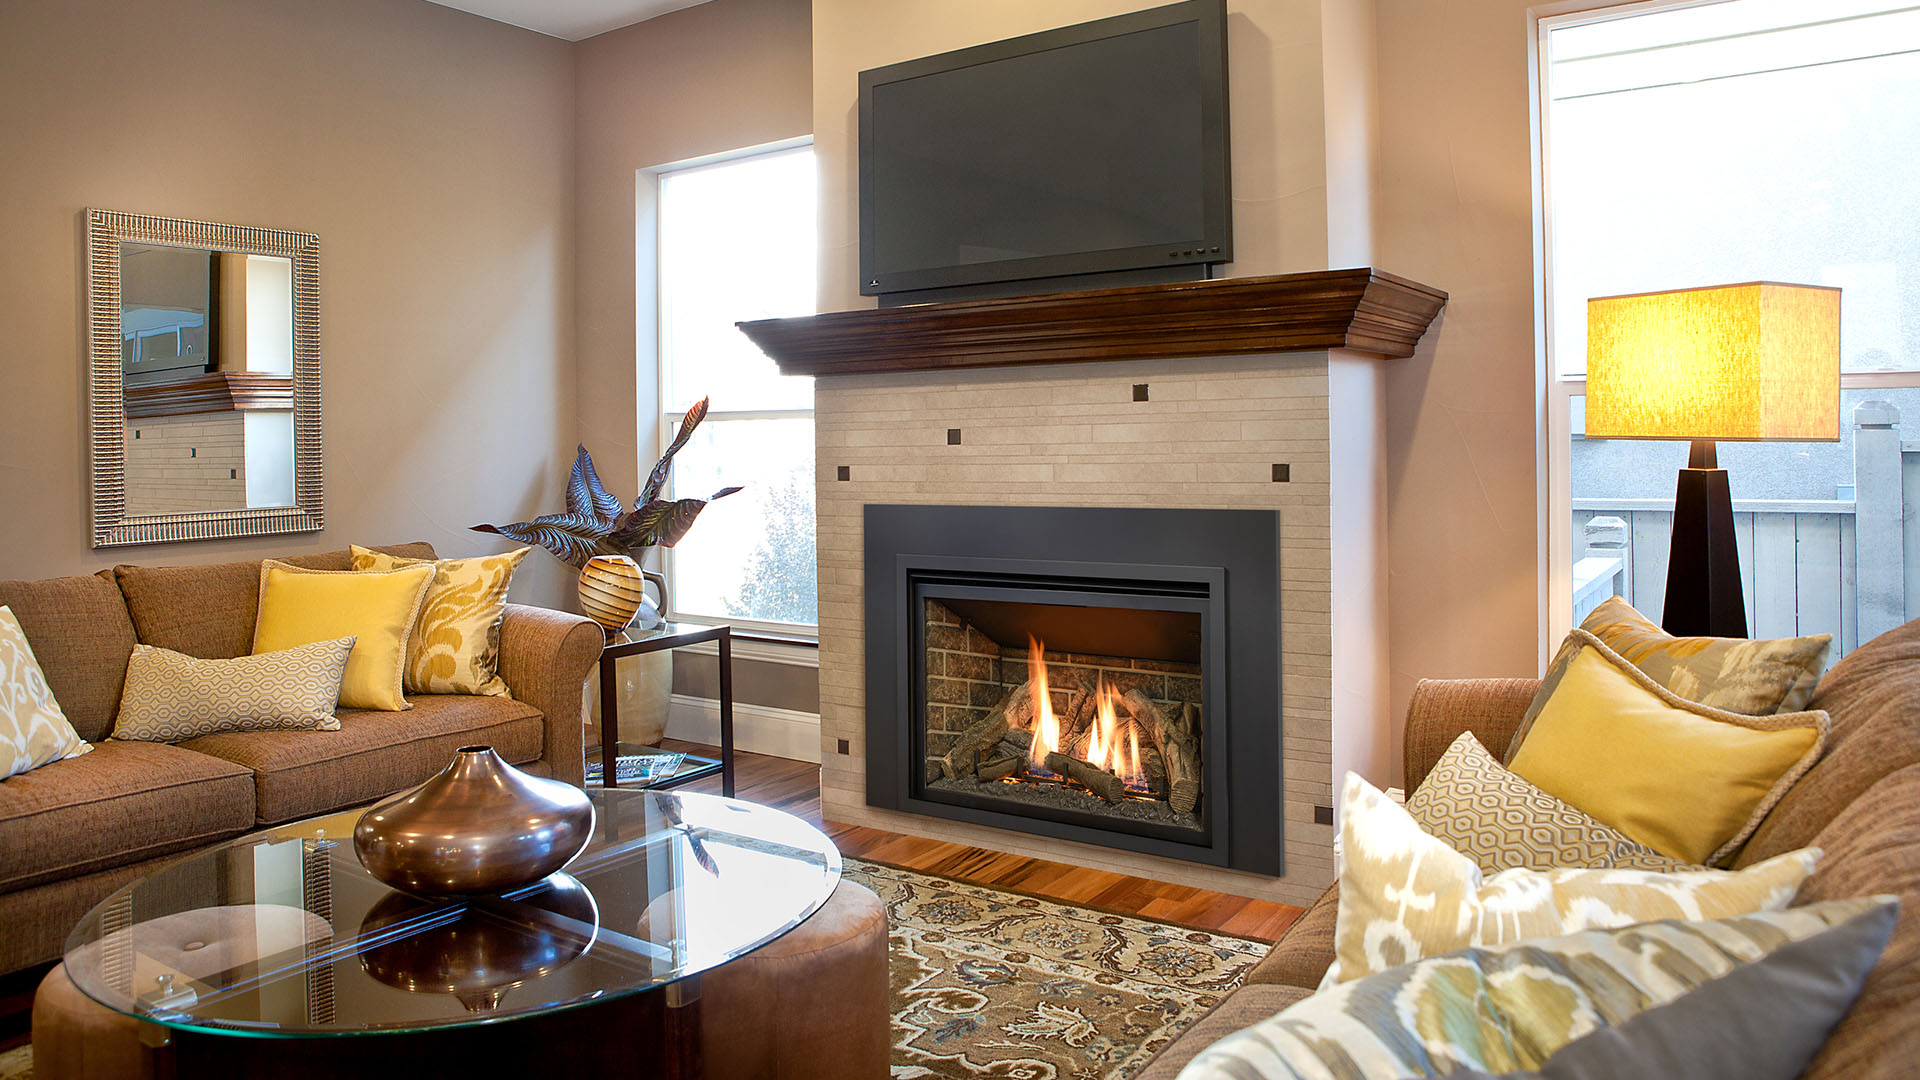 Come see the many gas fireplace inserts we sell & install including Regency